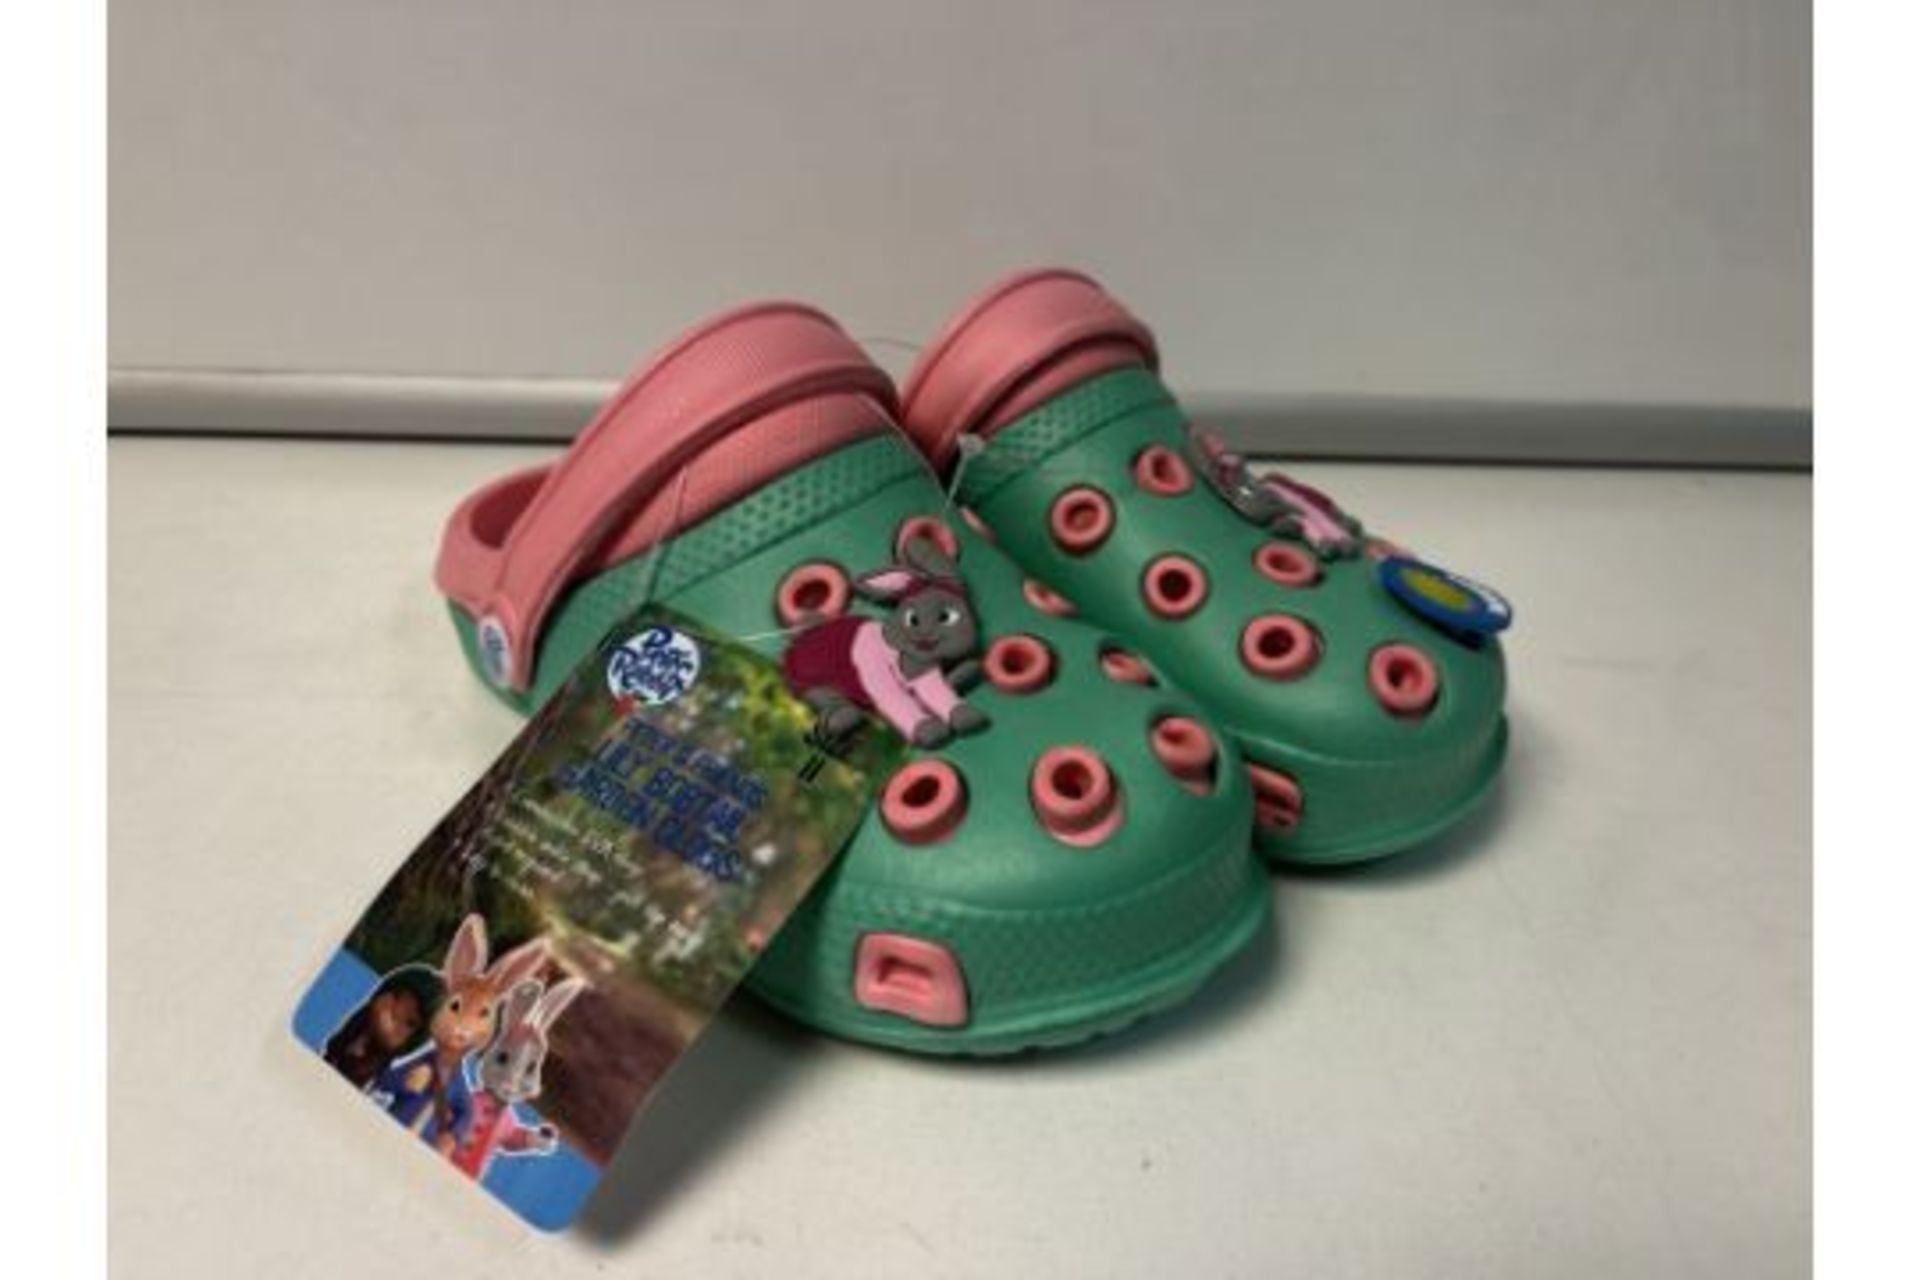 12 X NEW PAIRS OF PETER RABBIT & FRIENDS LILY BOBTAIL GARDEN CLOG CHILDRENS SHOES. SIZES MAY VARY.